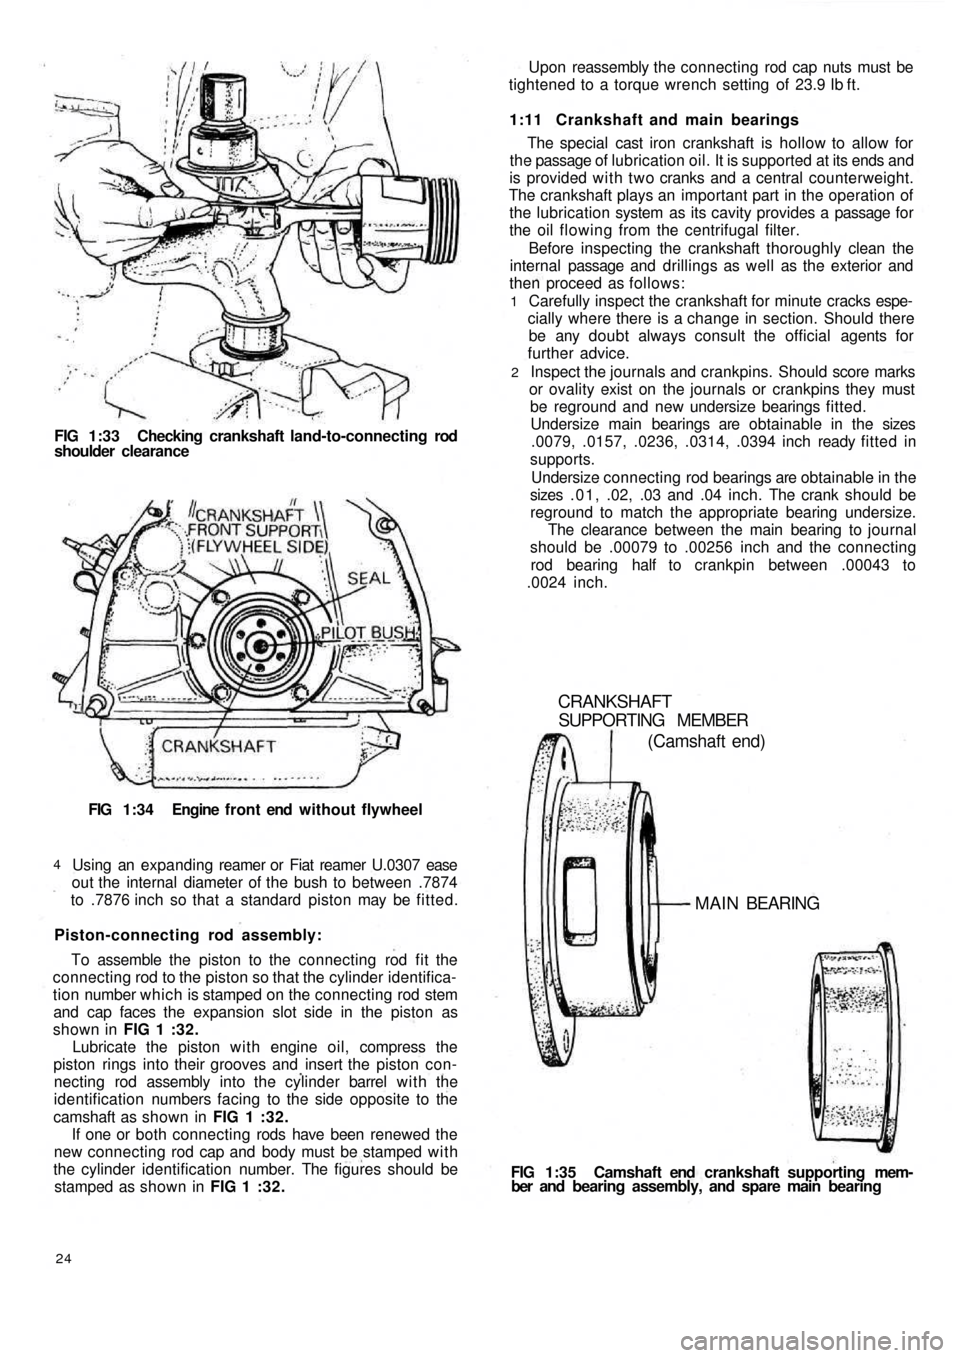 FIAT 500 1971 1.G Workshop Manual FIG 1:33 Checking crankshaft land-to-connecting rod
shoulder clearance
FIG 1:34 Engine  f r o n t  end  without flywheel
Using an expanding reamer or Fiat reamer U.0307 ease
out the internal diameter 